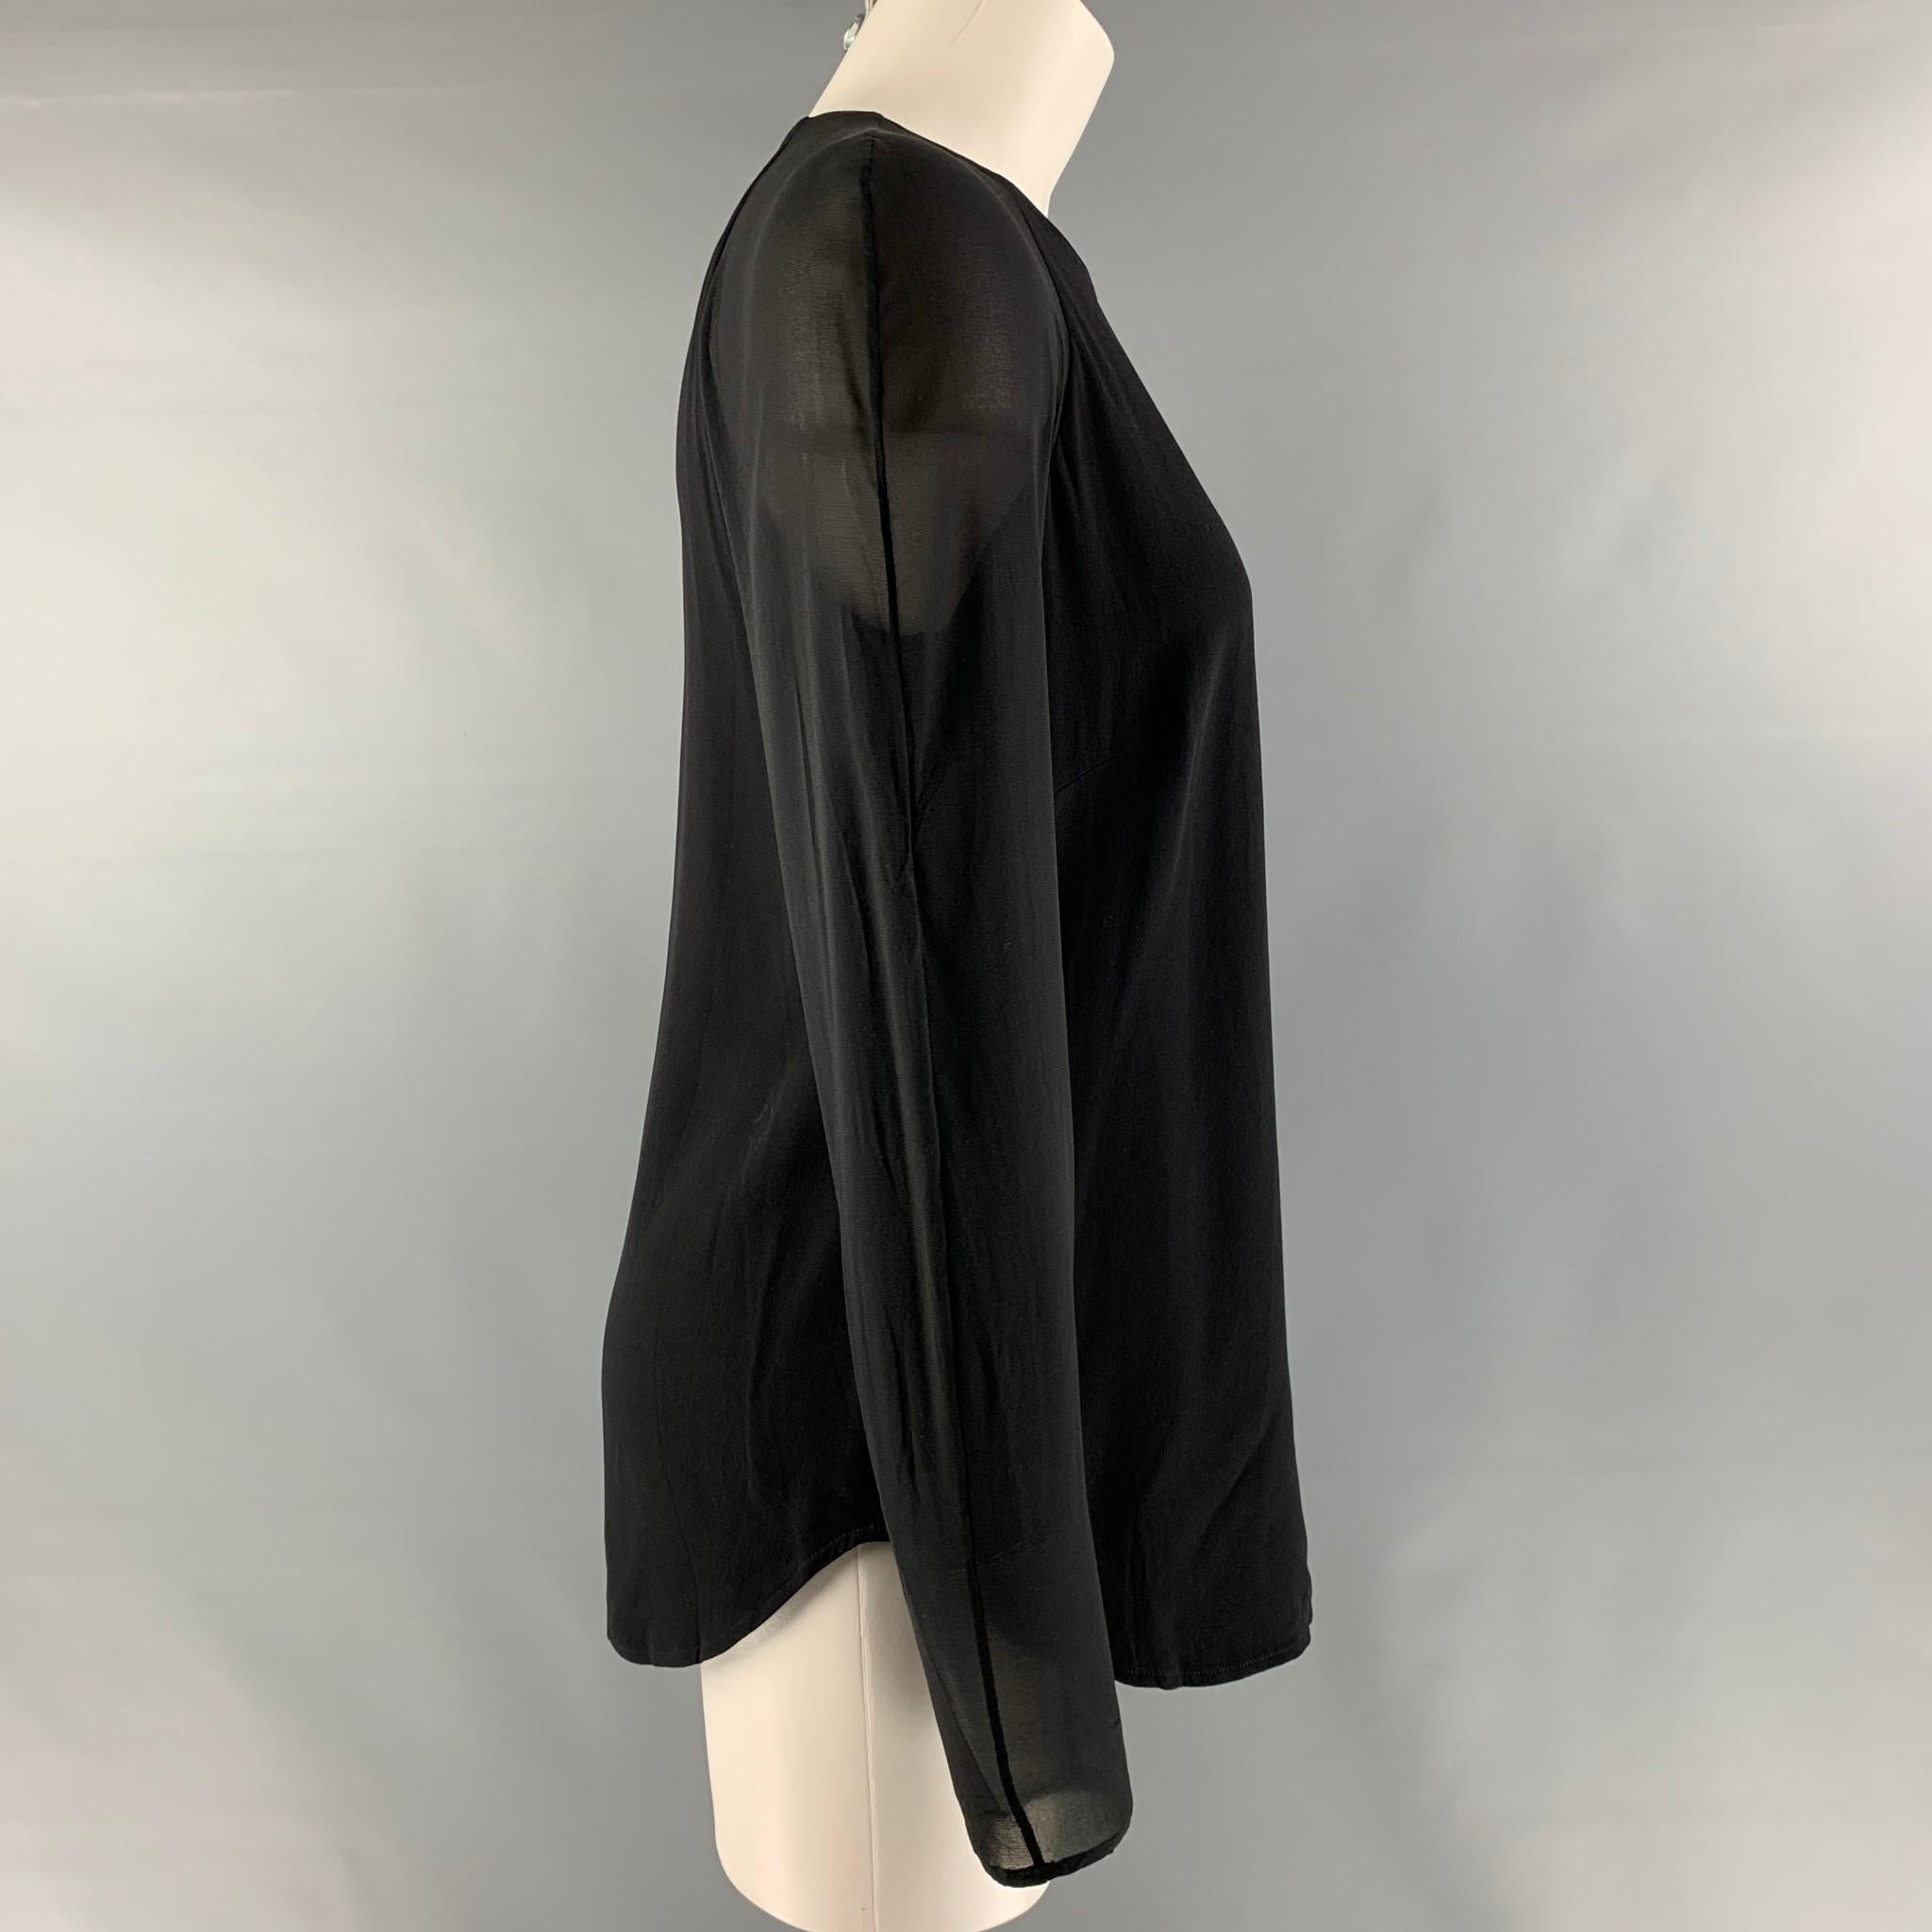 RALPH LAUREN 'BLACK LABEL by' raglan long sleeve blouse comes in a black acetate and viscose featuring see through sleeves and an invisible zipper closure at center back. Made in USA.

Very Good Pre-Owned Condition. Moderate marks at back.
Marked: